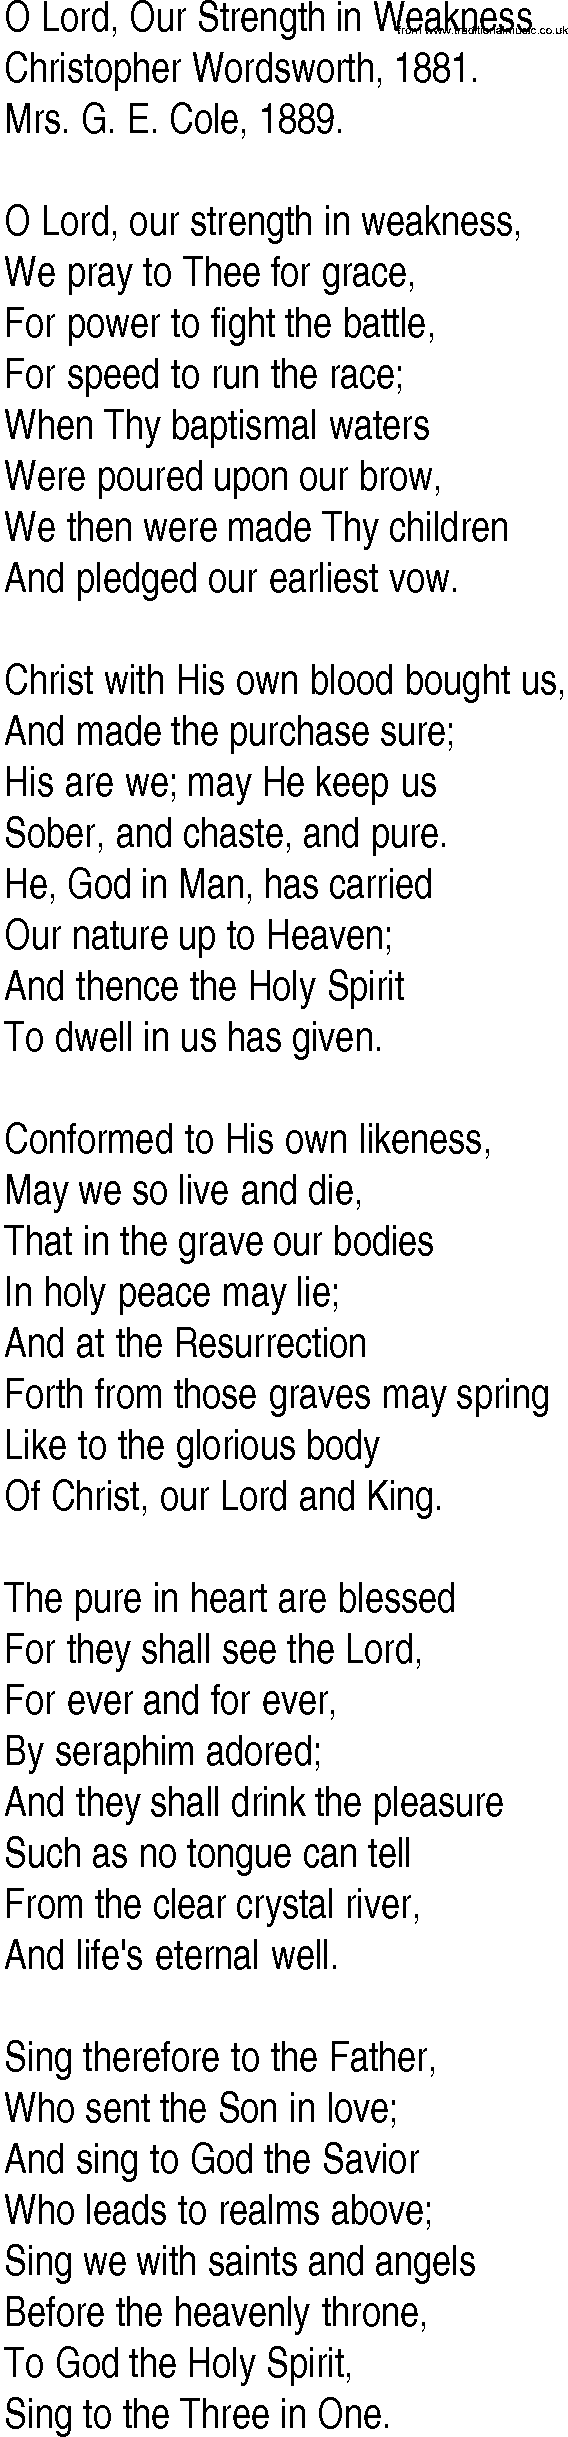 Hymn and Gospel Song: O Lord, Our Strength in Weakness by Christopher Wordsworth lyrics